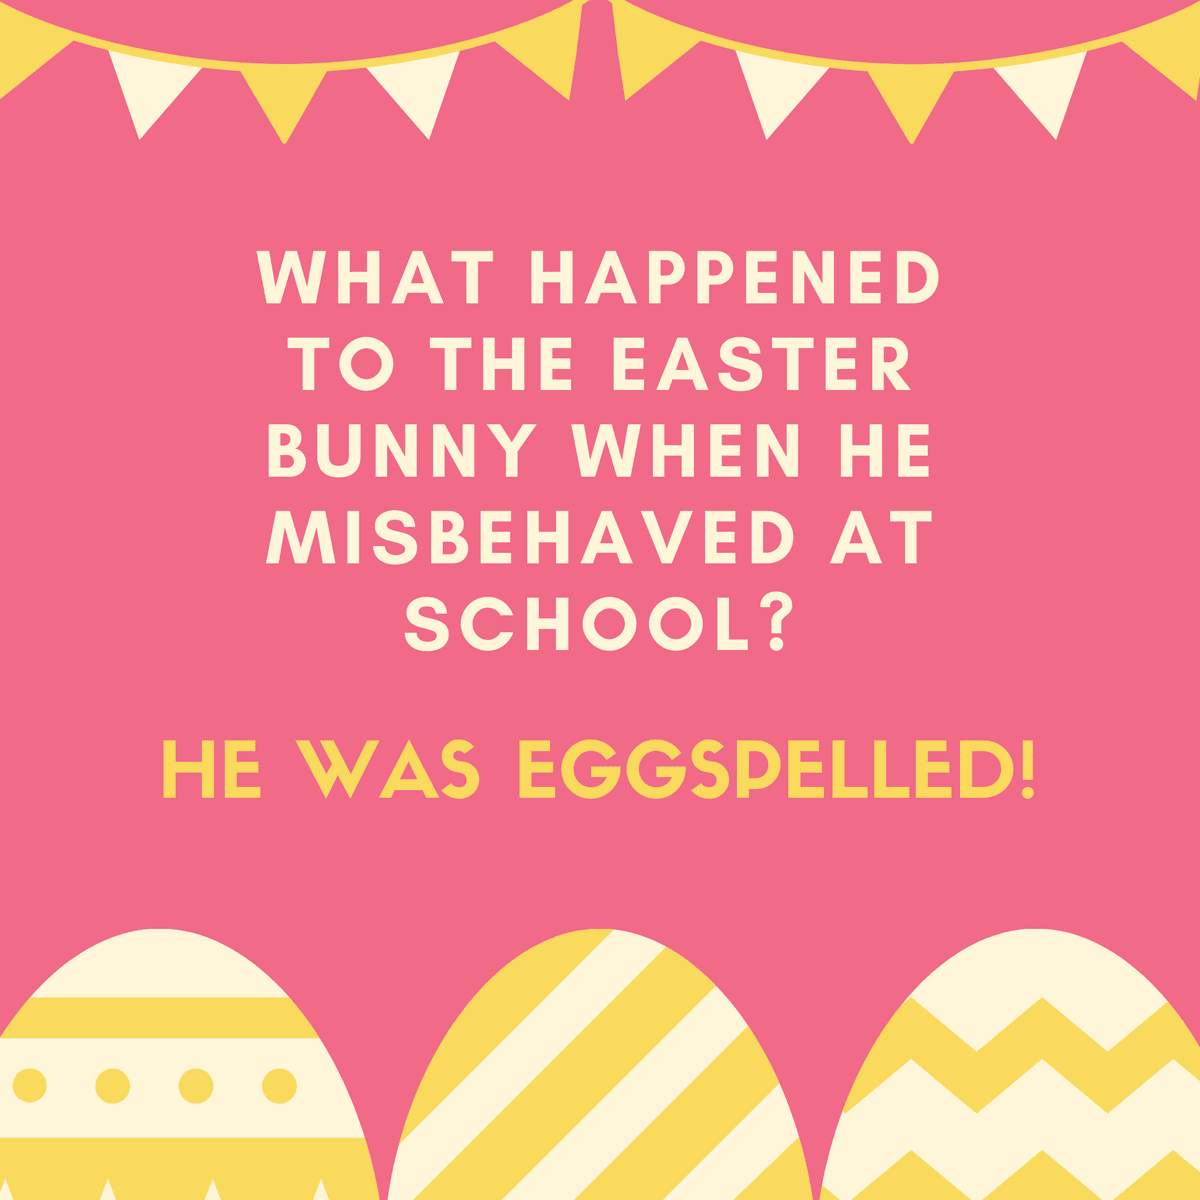 What happened to the Easter Bunny when he misbehaved at school? He was eggspelled!